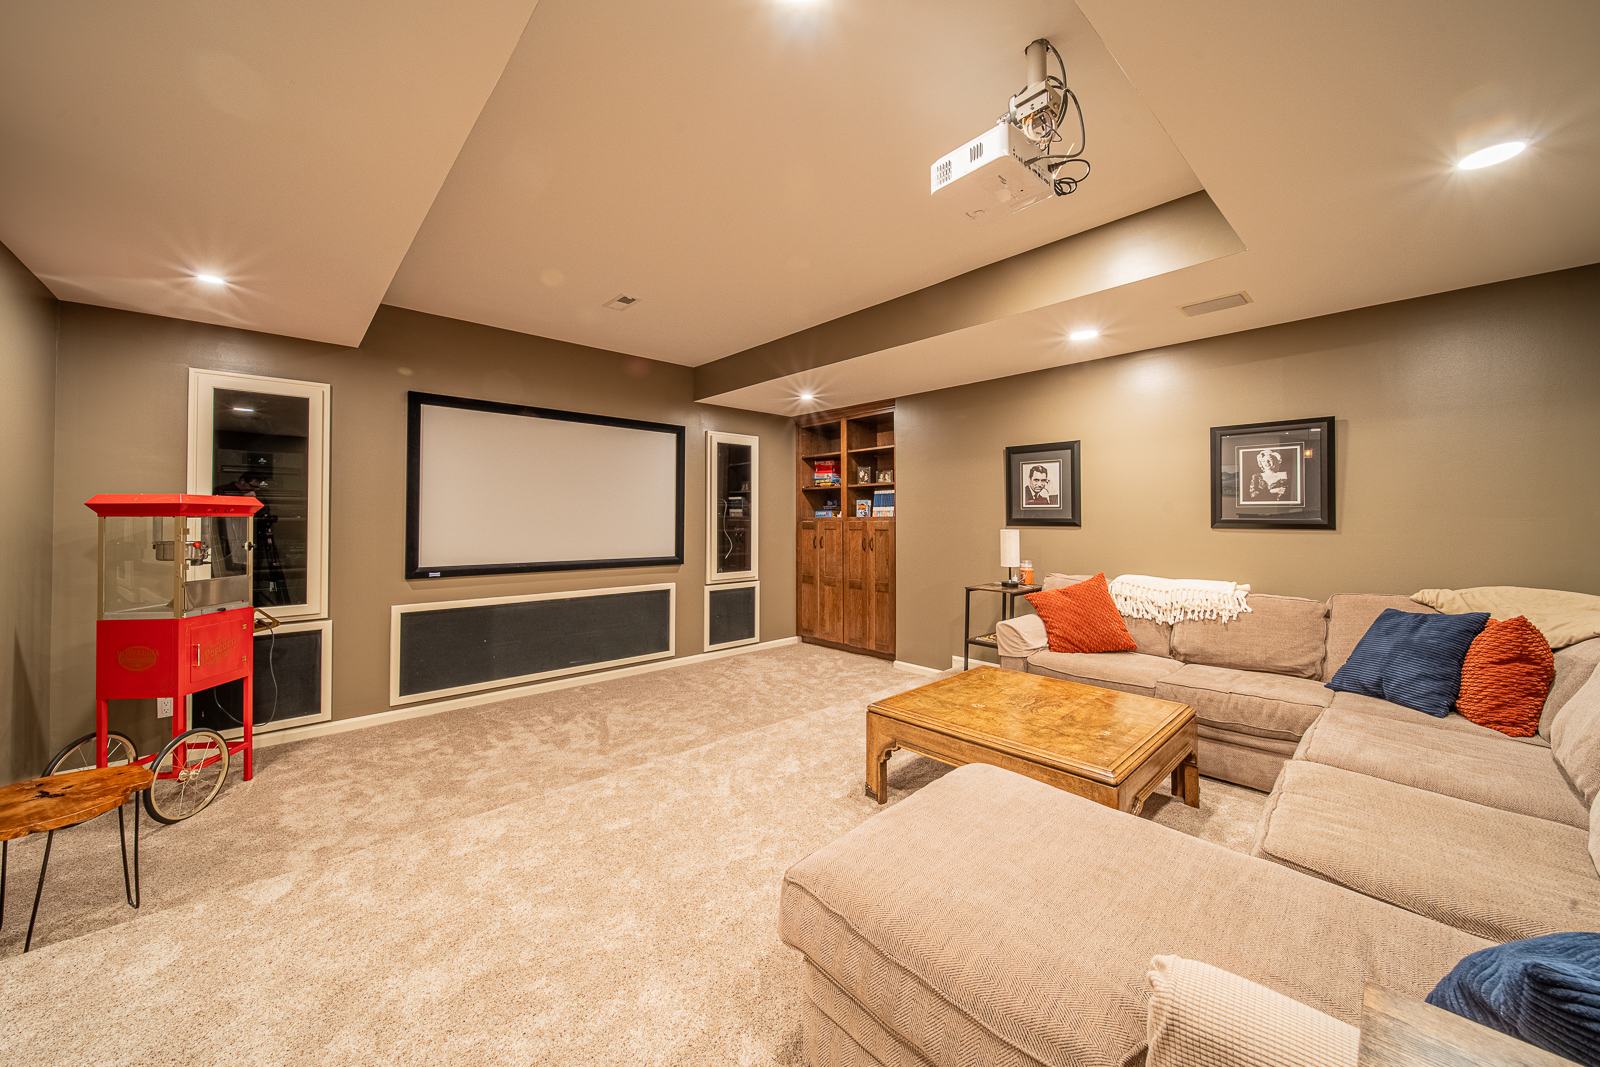 Rustic yet elegant living room space in the remodeled basement of Ripple Creek Drive home.